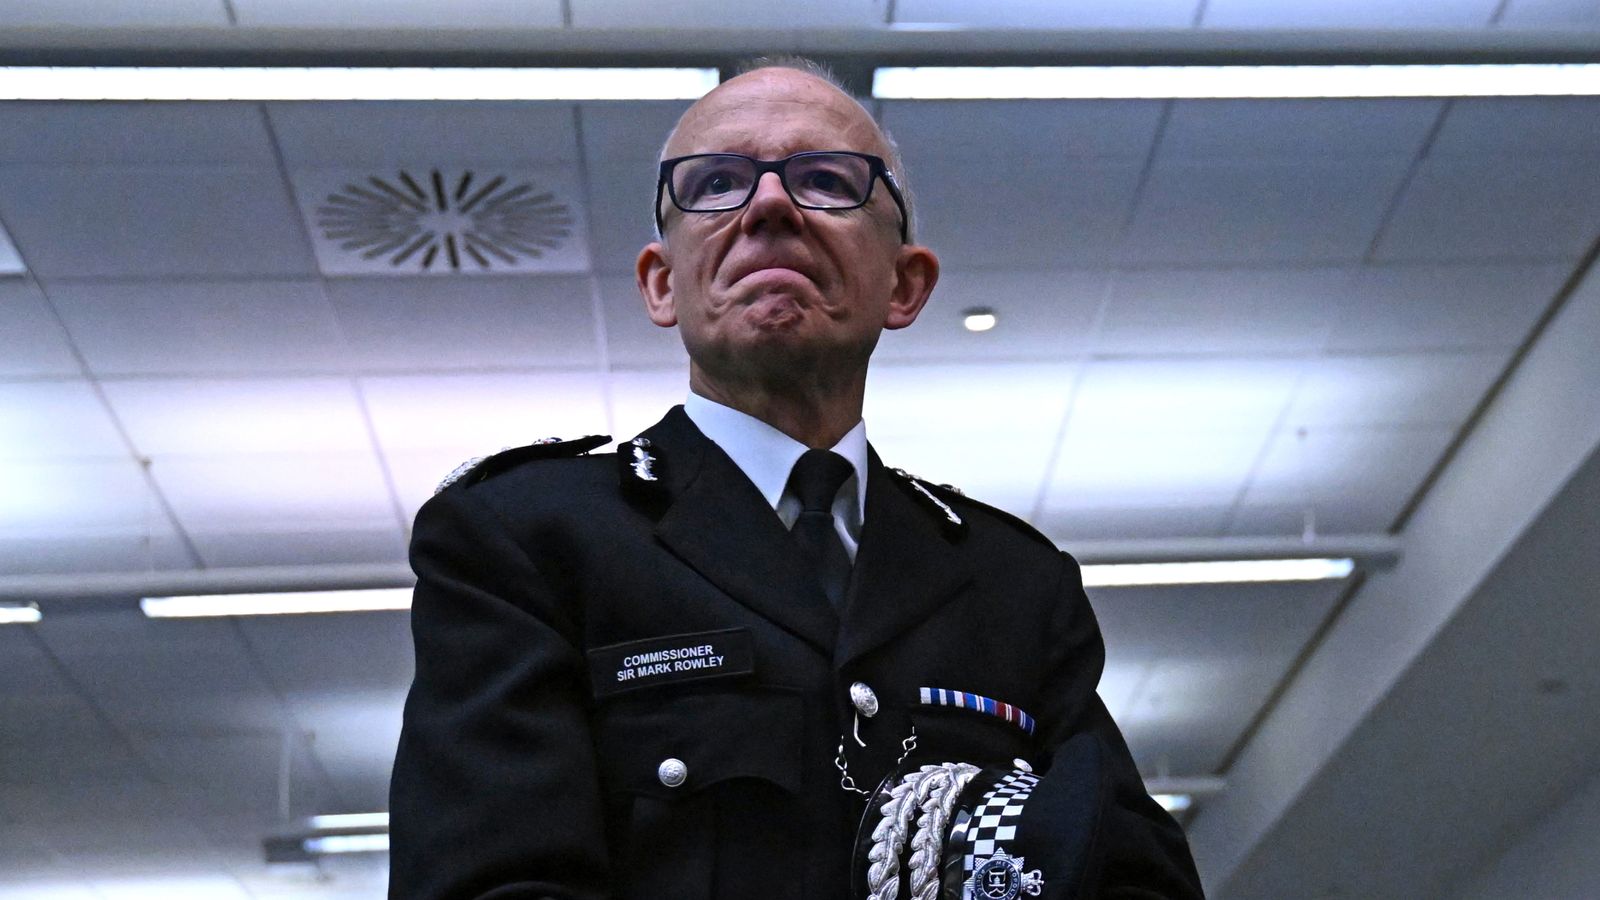 New Met Police chief Sir Mark Rowley promises to be 'ruthless' in kicking out corrupt officers | UK News | Sky News